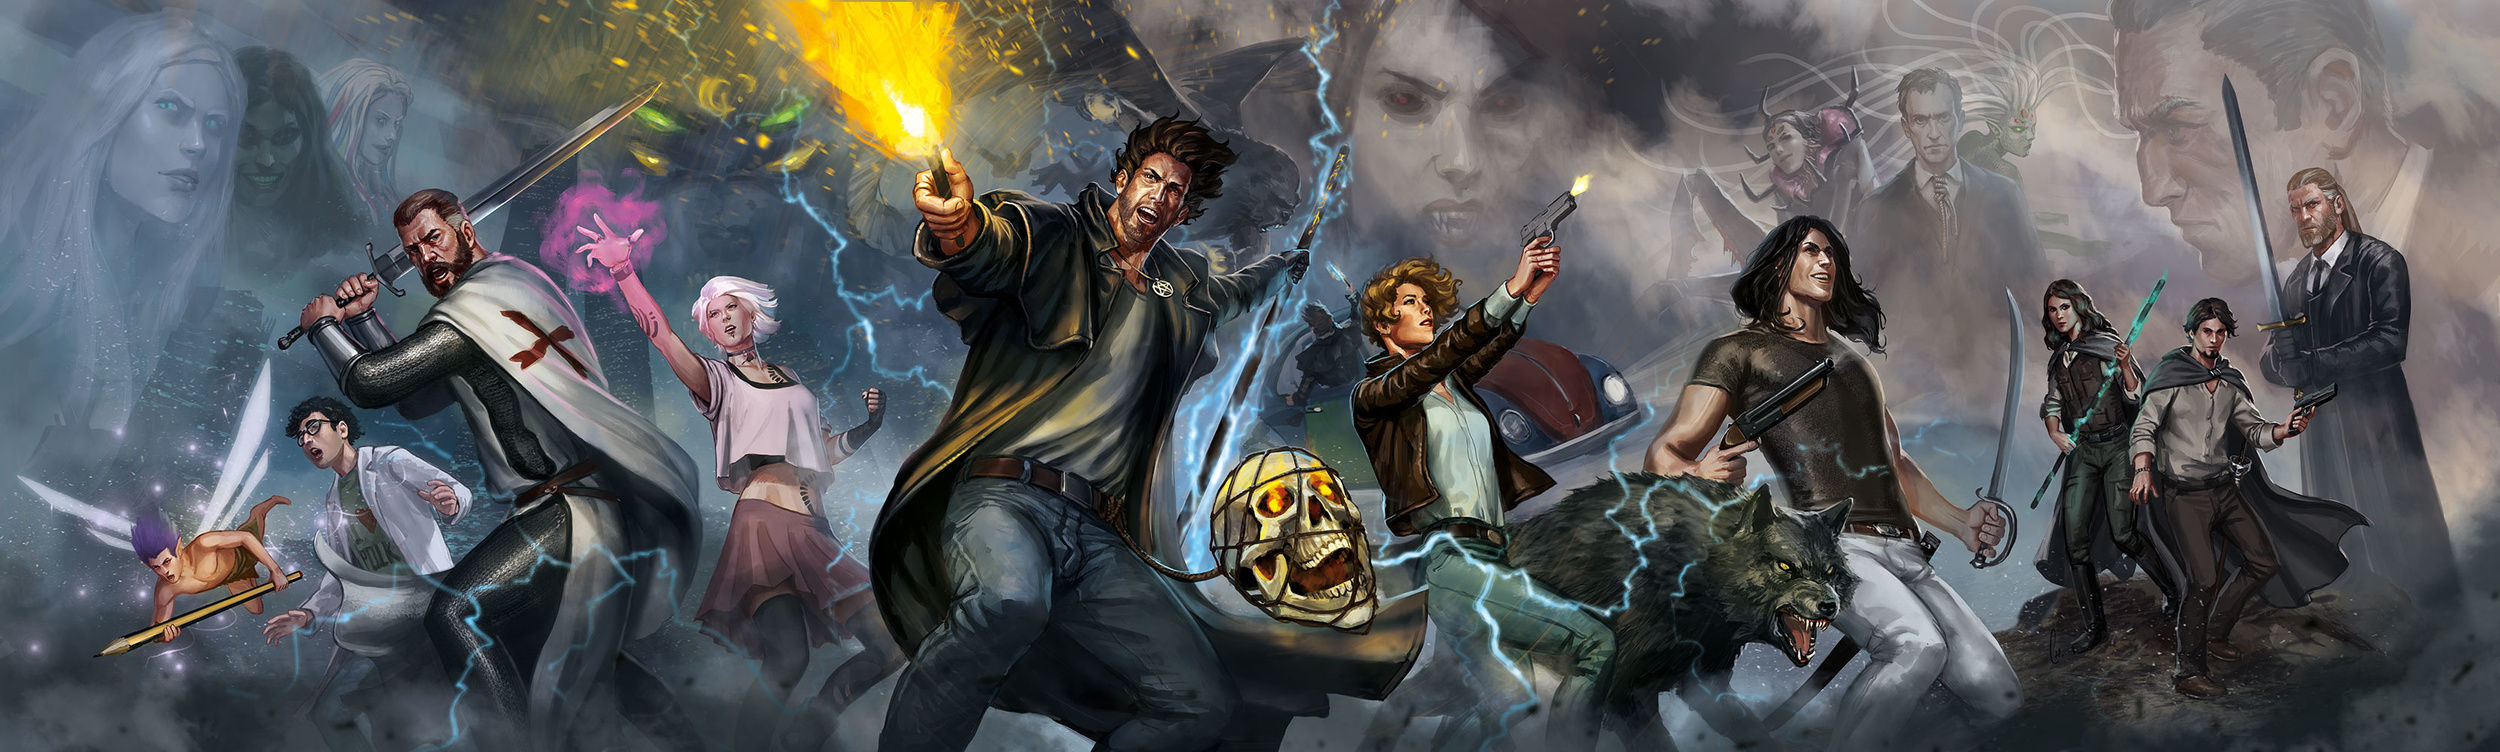 Characters of The Dresden Files Fanmade Illustration